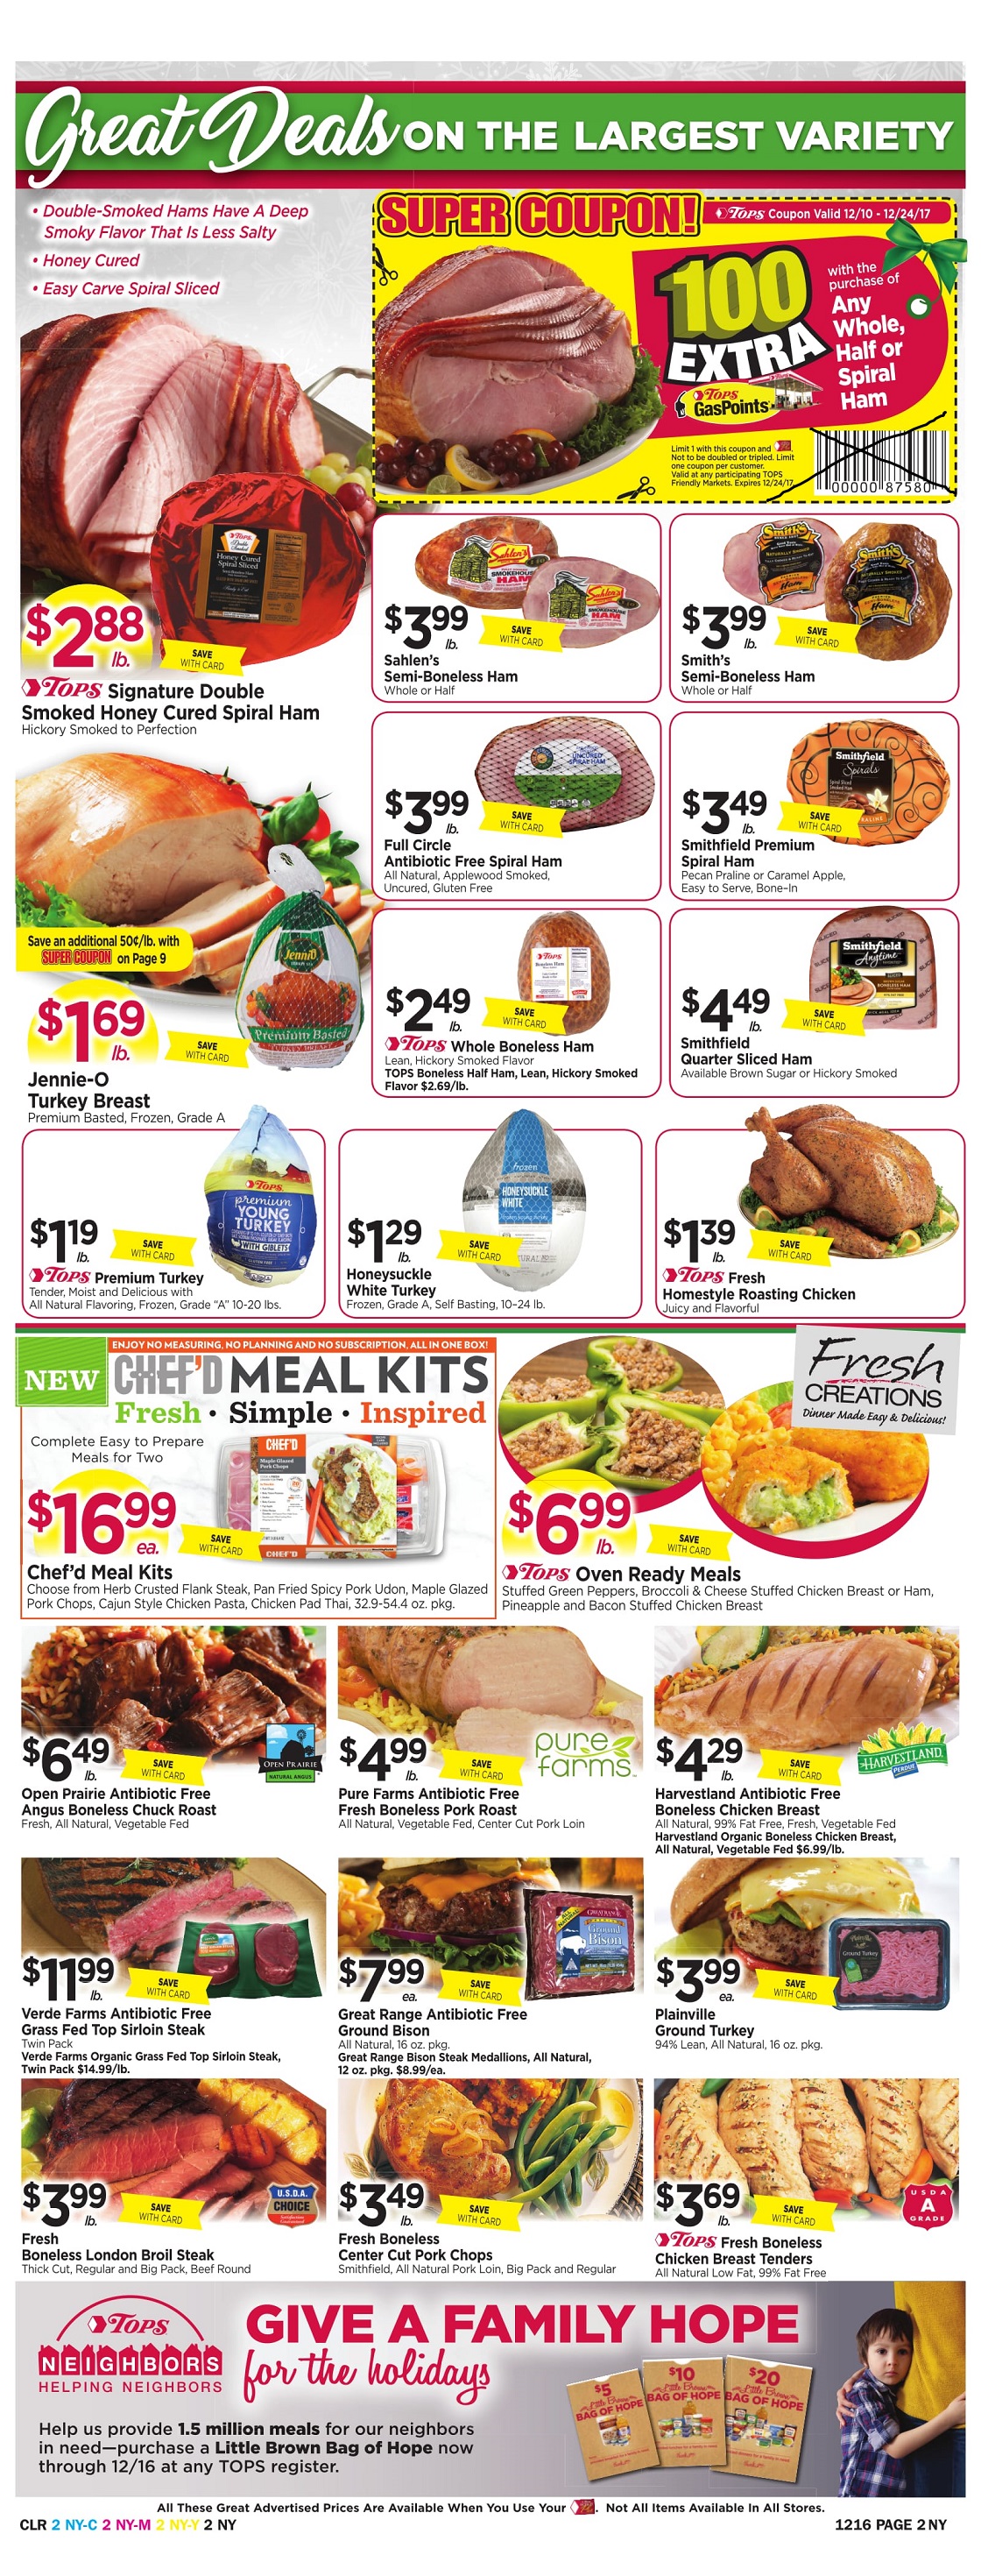 Tops Markets Ad Preview Week 12 10 Page 2